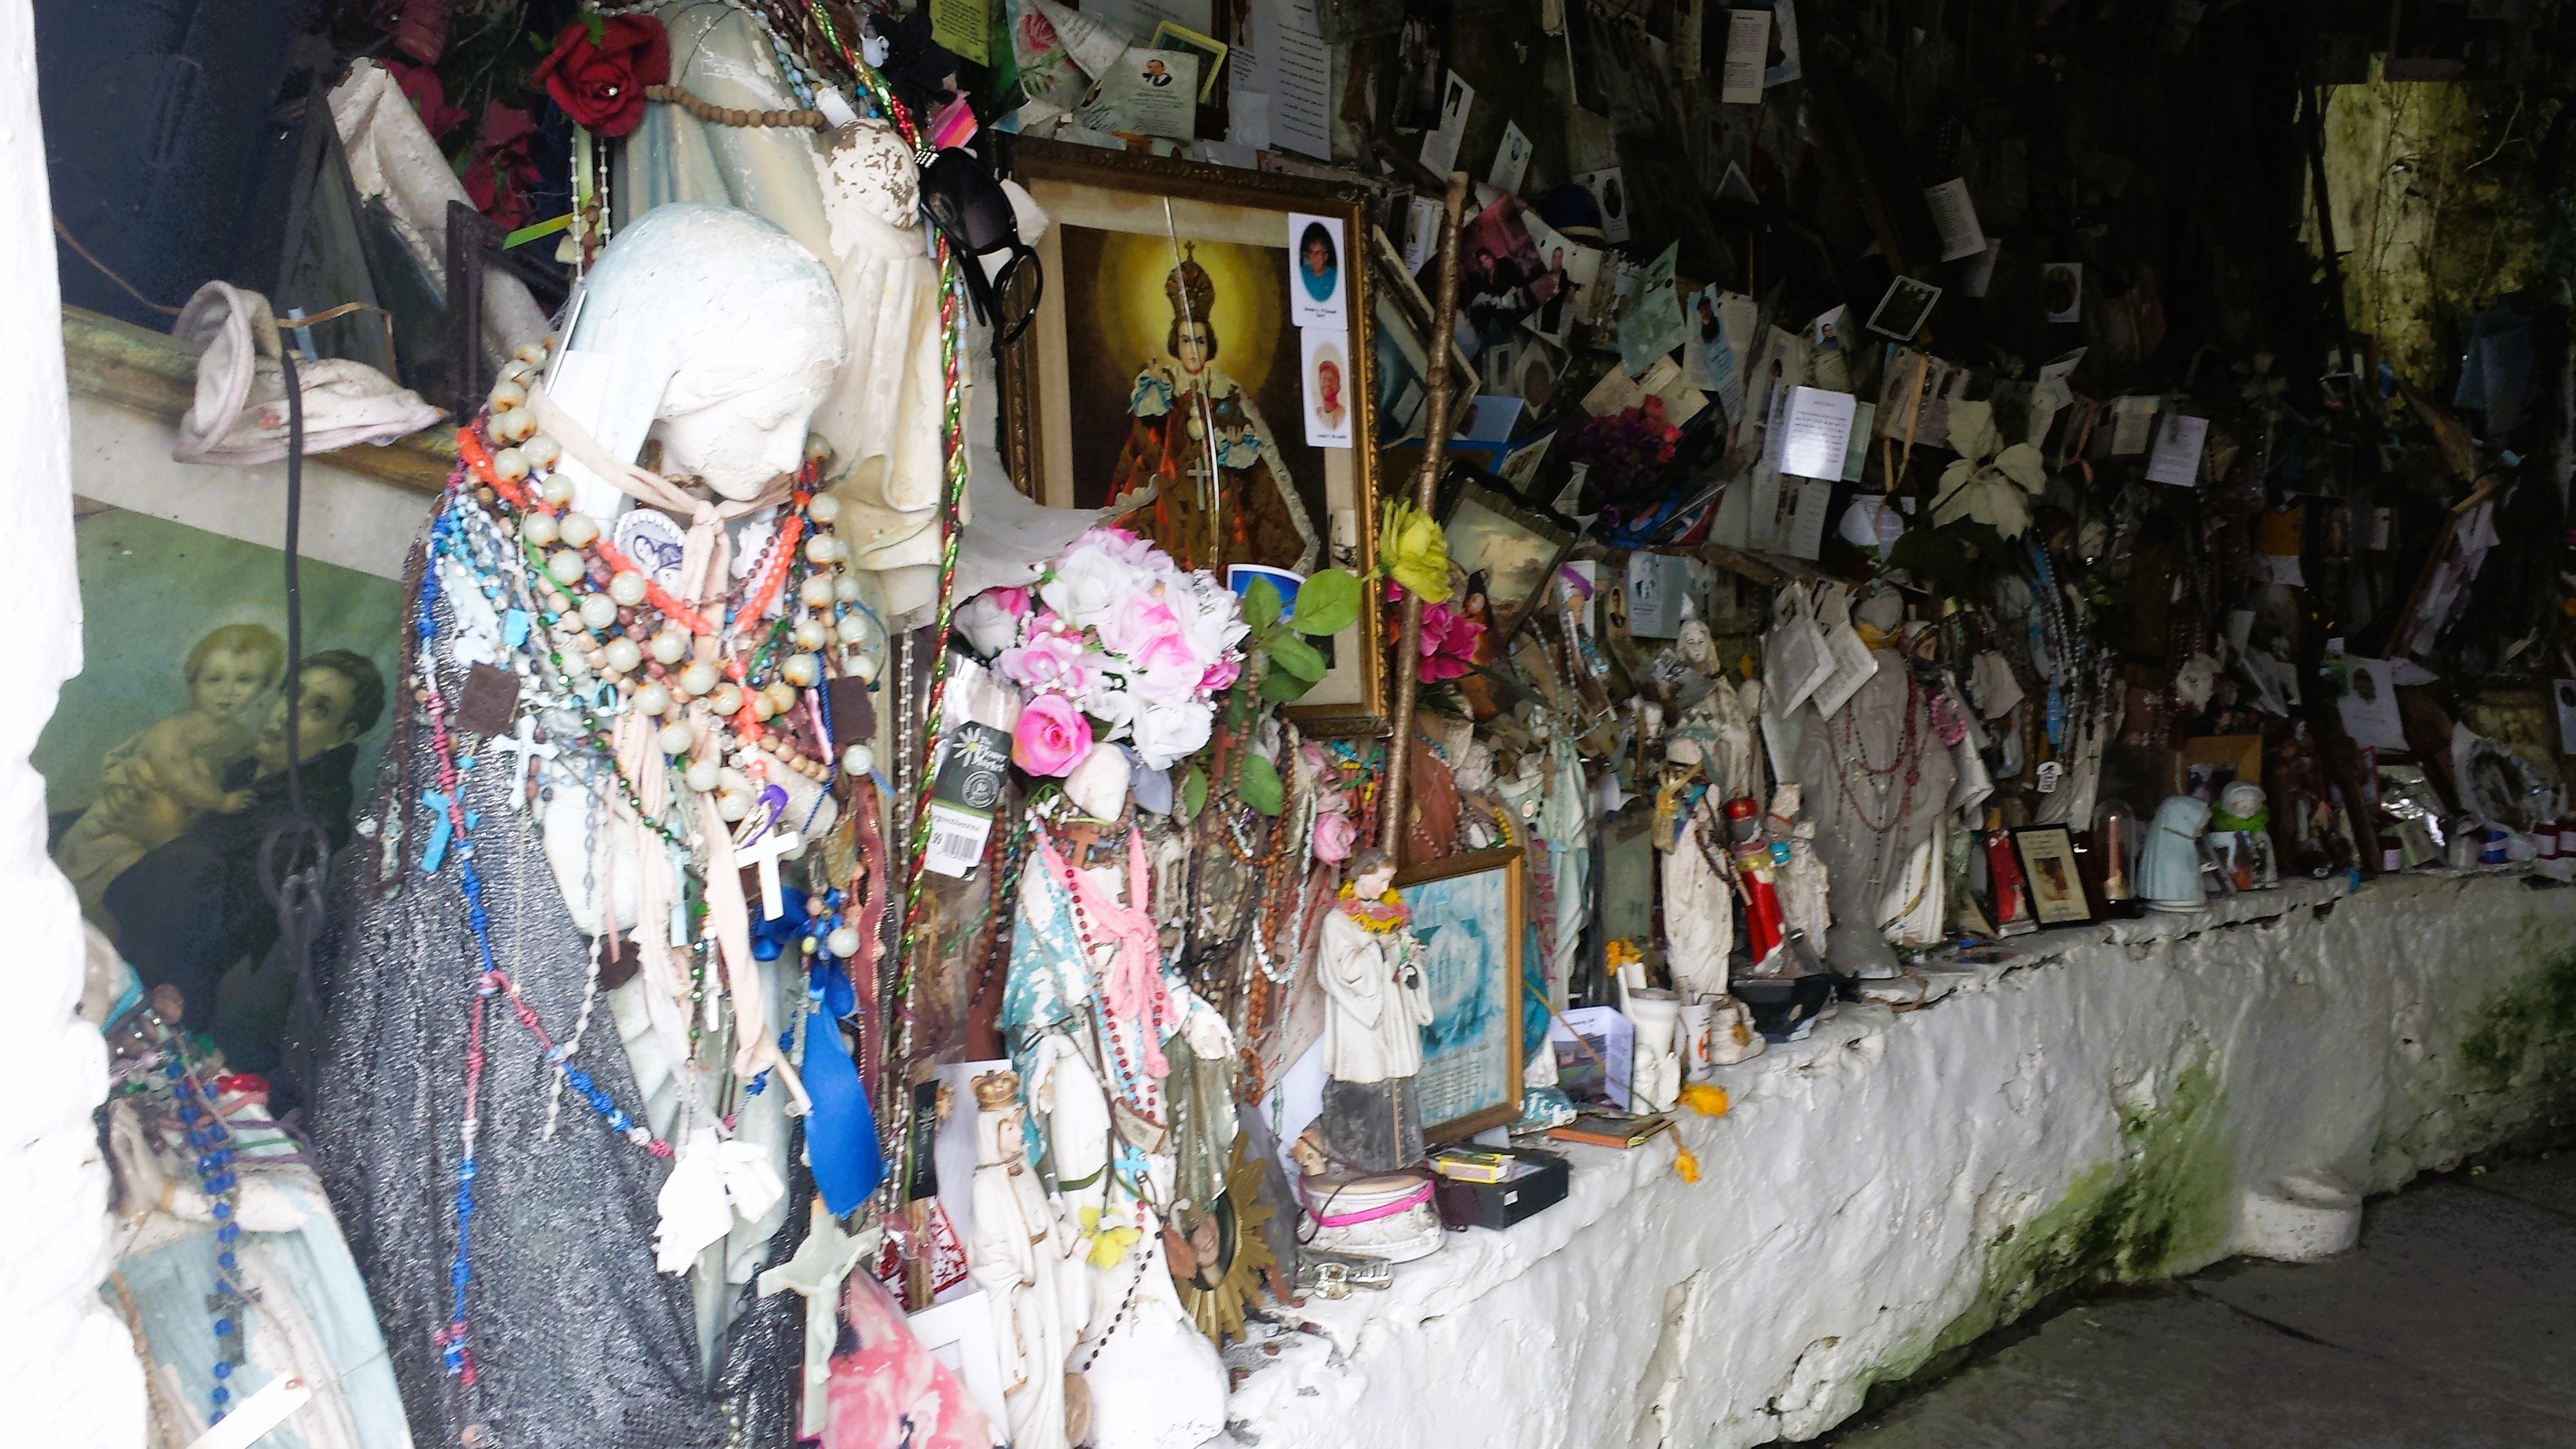 inside the extroardinary holy well of Maire na Gael, Brigid's holy well in County Clare, where people have left uncountable numbers of prayers, tokens, gifts and pictures for Brigid.